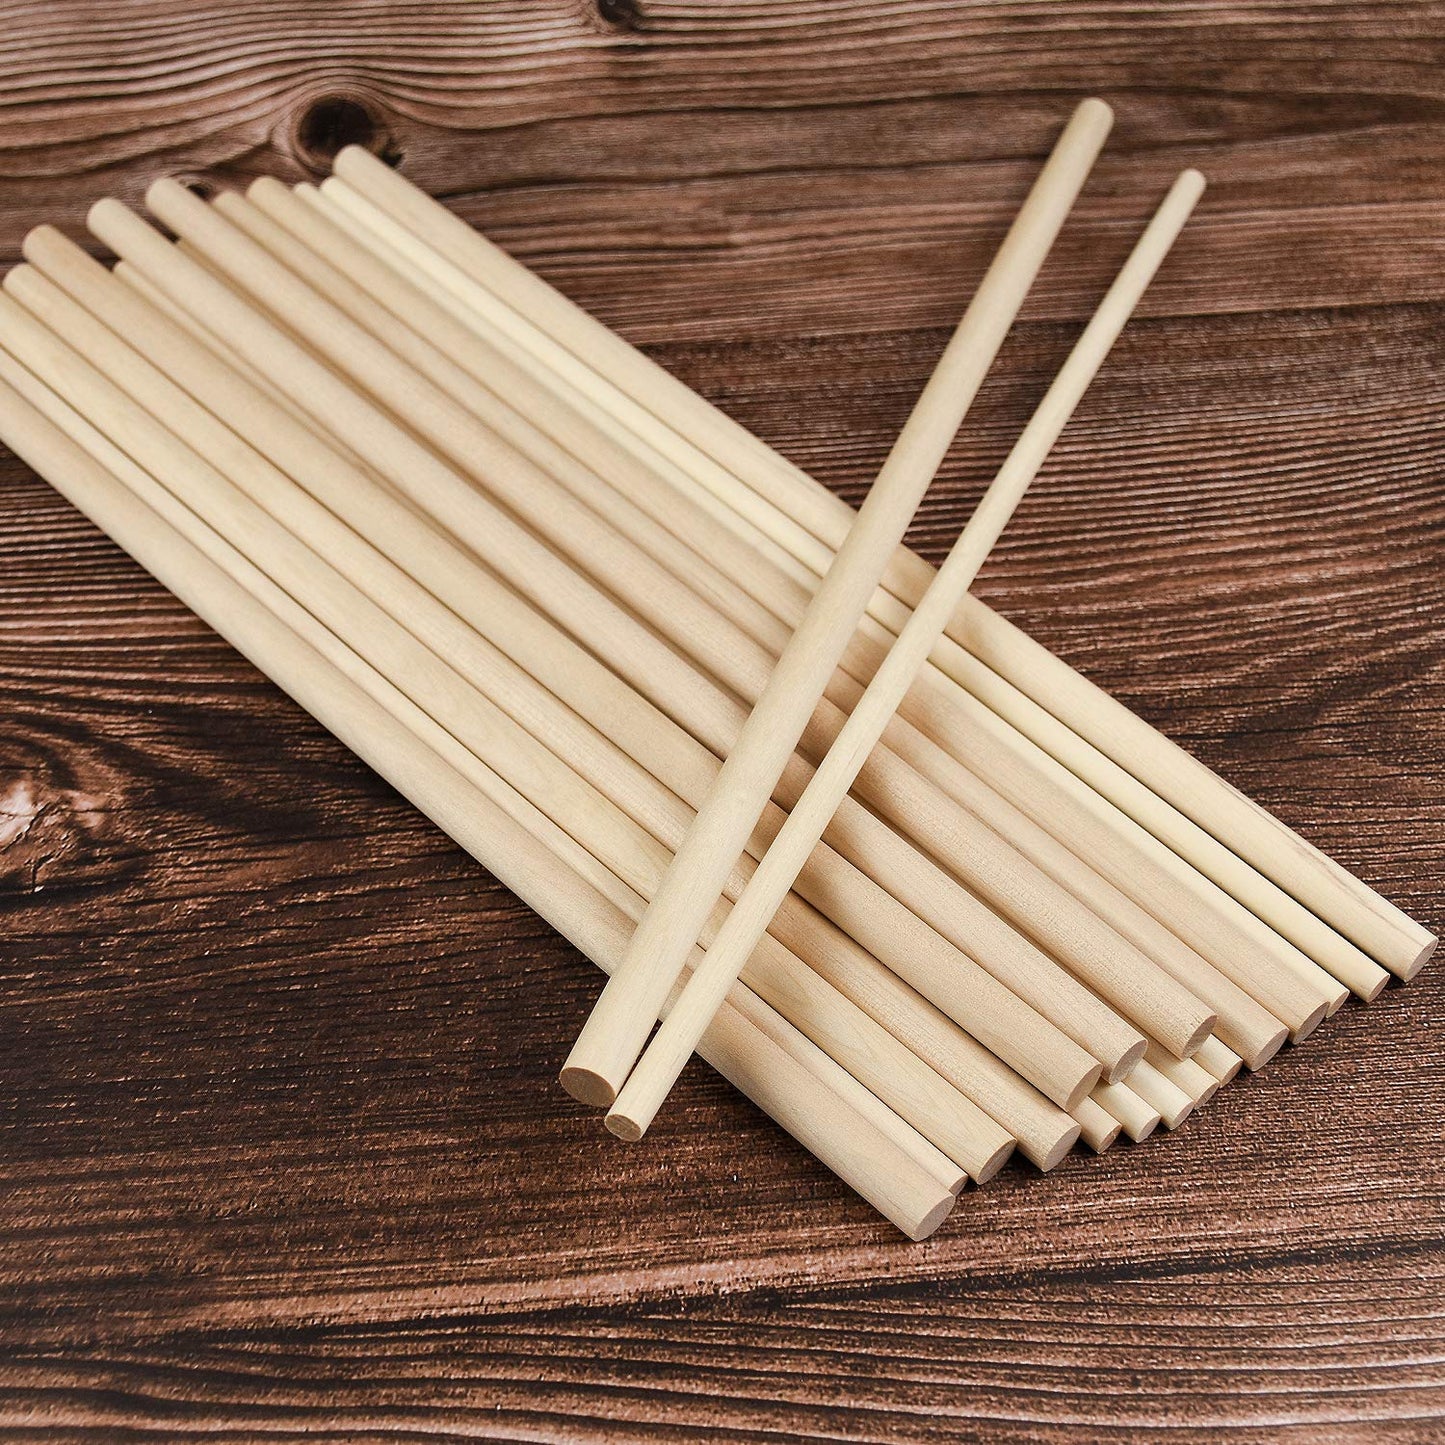 20 Pcs Wooden Dowel Rods for Craft, Unfinished Natural Wood Craft Dowel Sticks 1/4 Inch / 2/5 Inch x 12 Inch